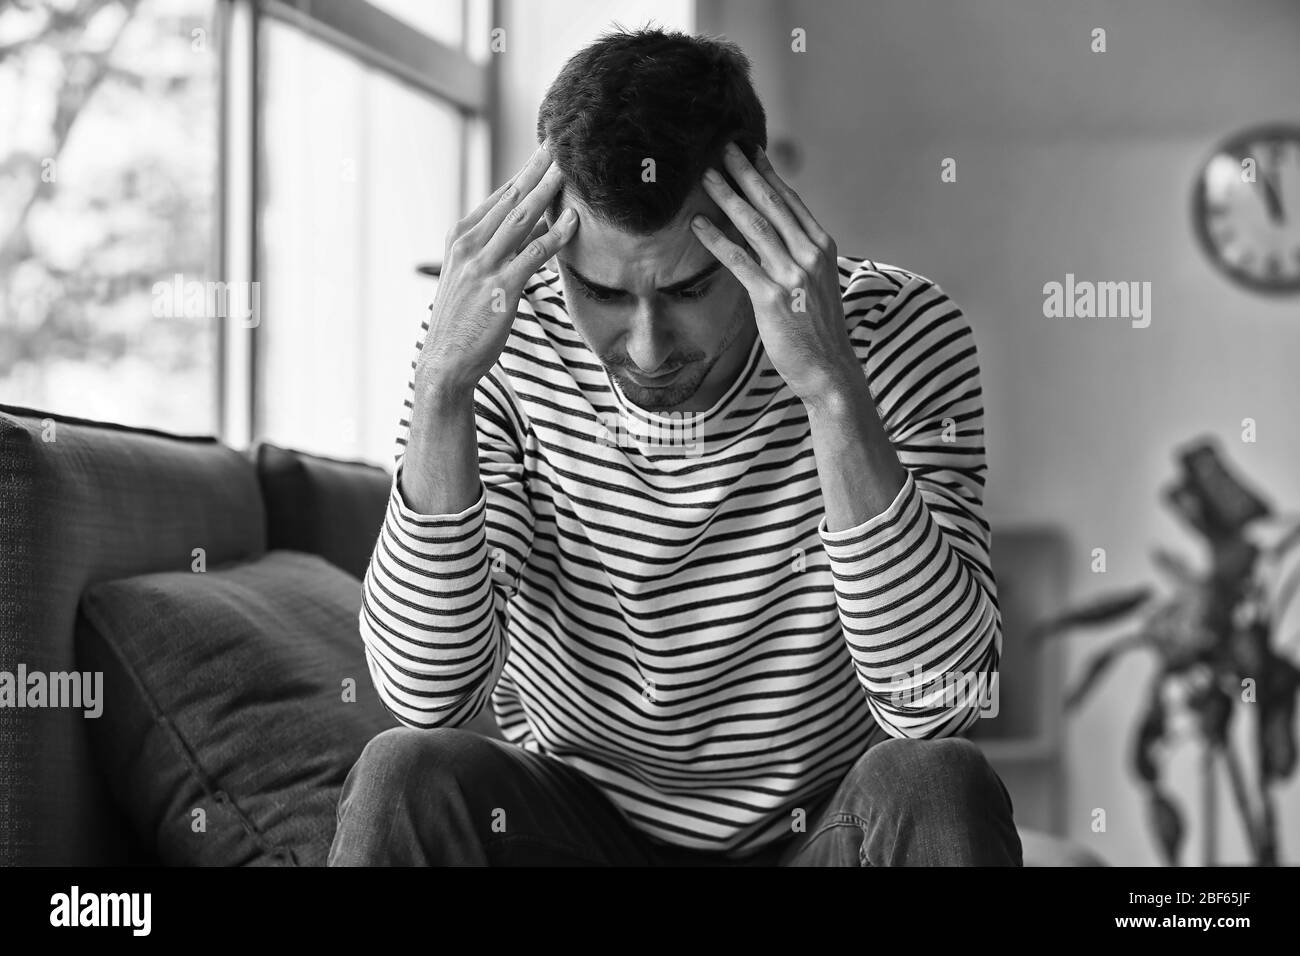 Black and white portrait of depressed young man at home Stock Photo